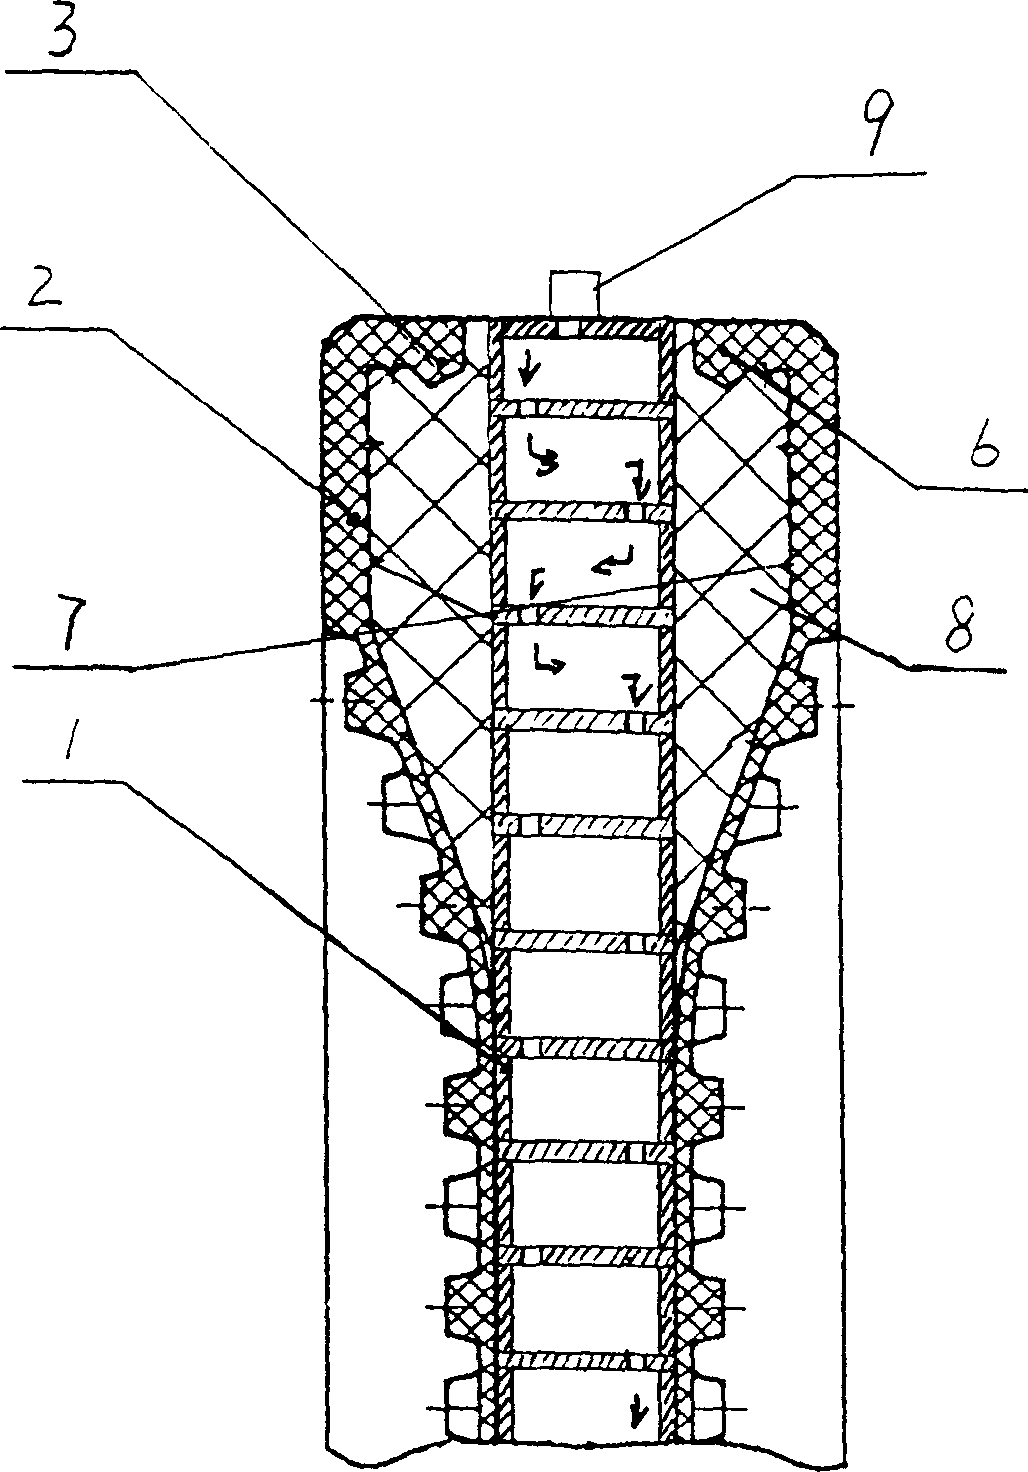 Lateral embedded type diaphragm filter plate constructed from controllable constant temperature plate core and assembling process